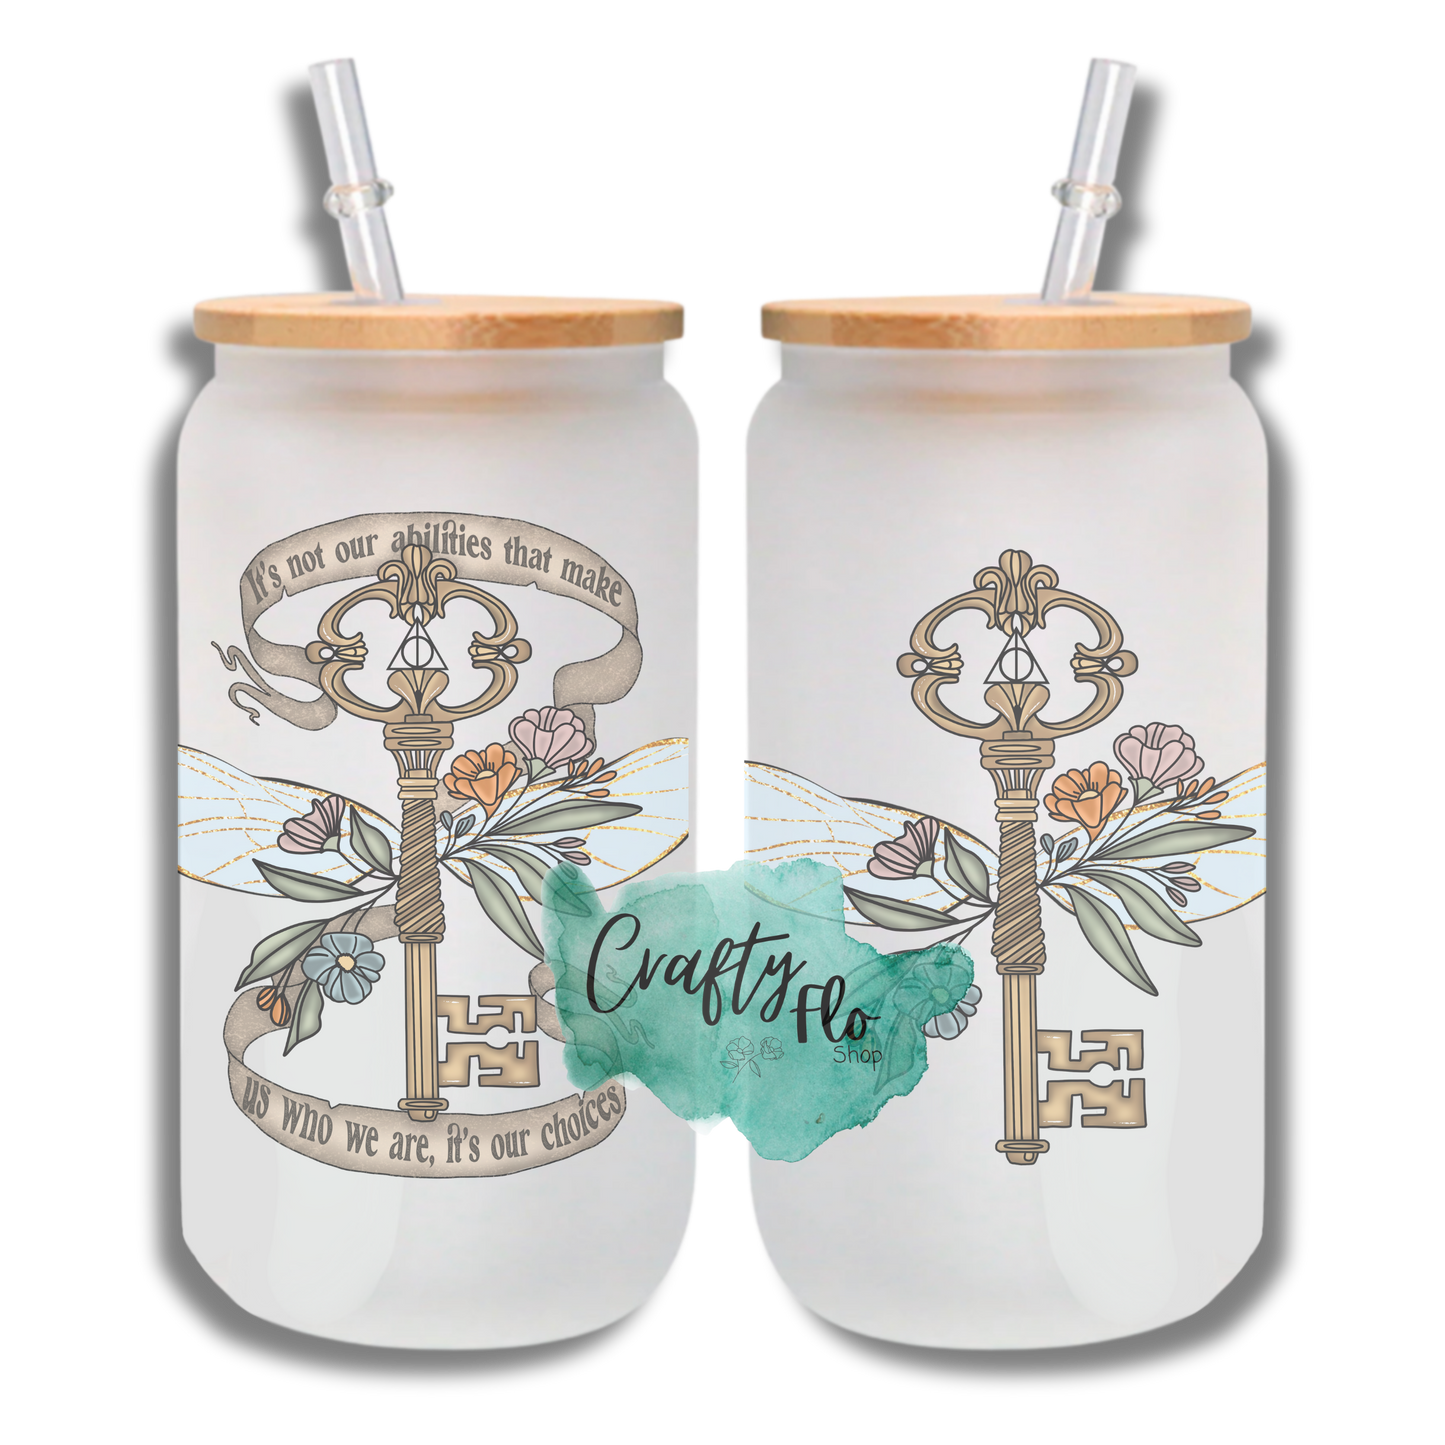 Wizarding School of Magic inspired fan art 16 oz frosted or clear glass can with bamboo lid and straw